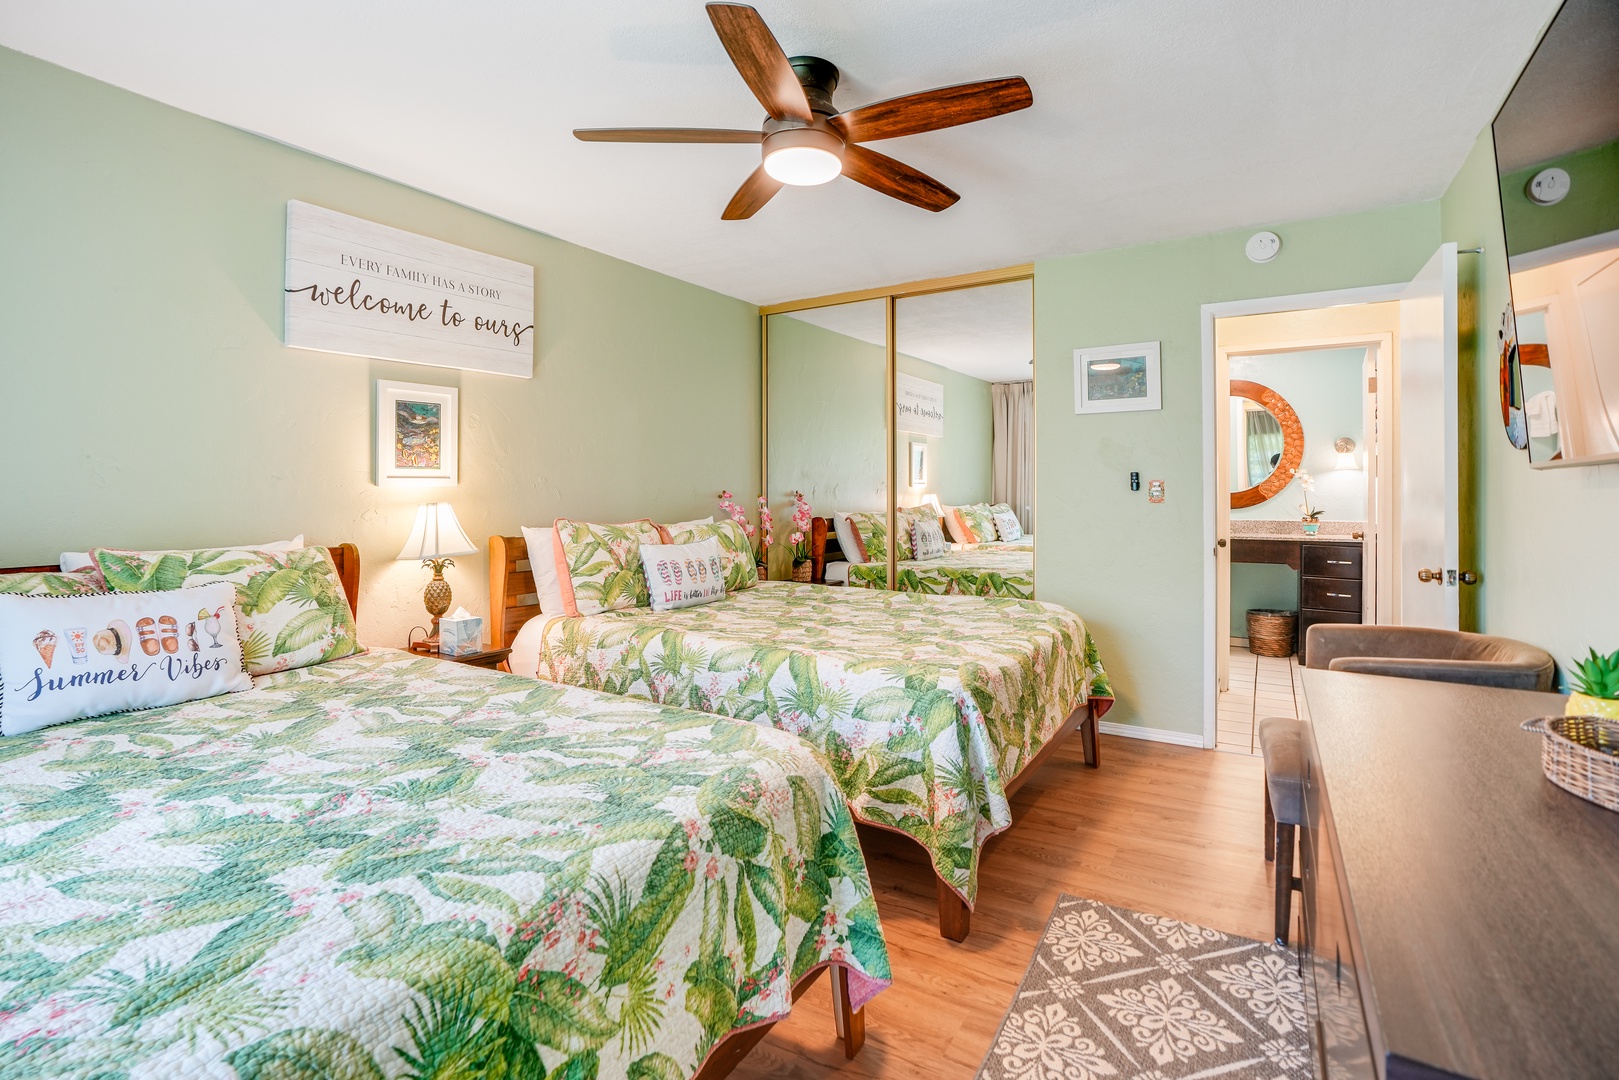 Kapaa Vacation Rentals, Nani Hale - Double queens in the bedroom with loads of storage